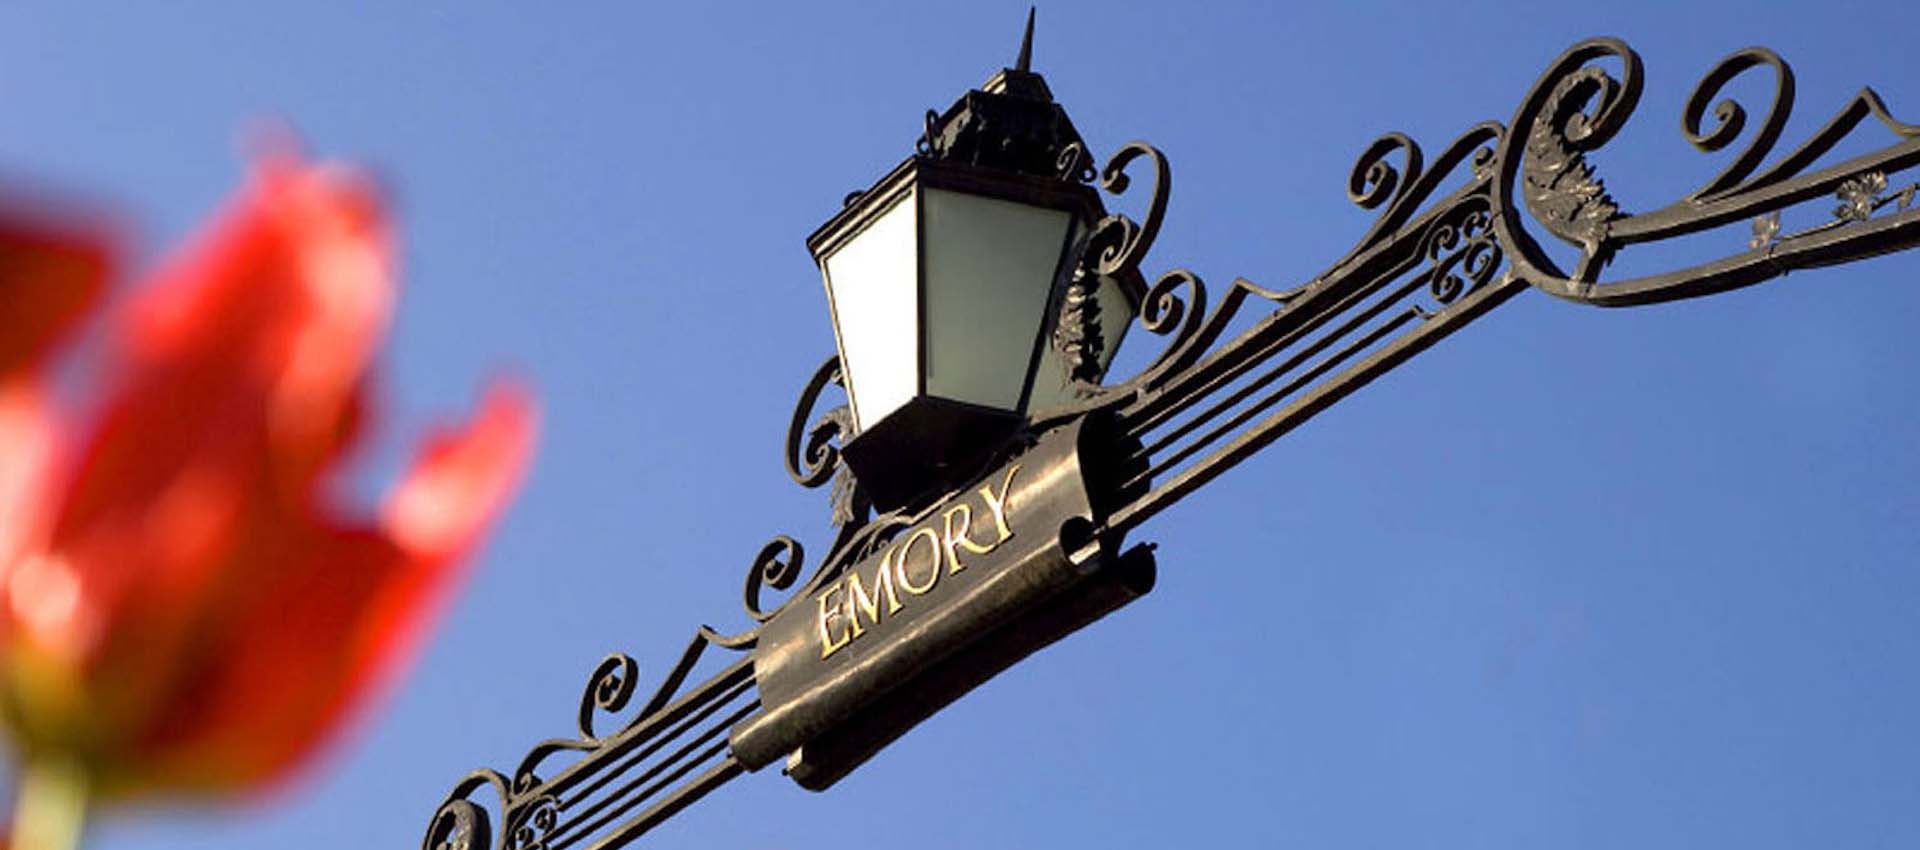 Lantern and Emory logo on Haygood-Hopkins gate with tulips in the foreground